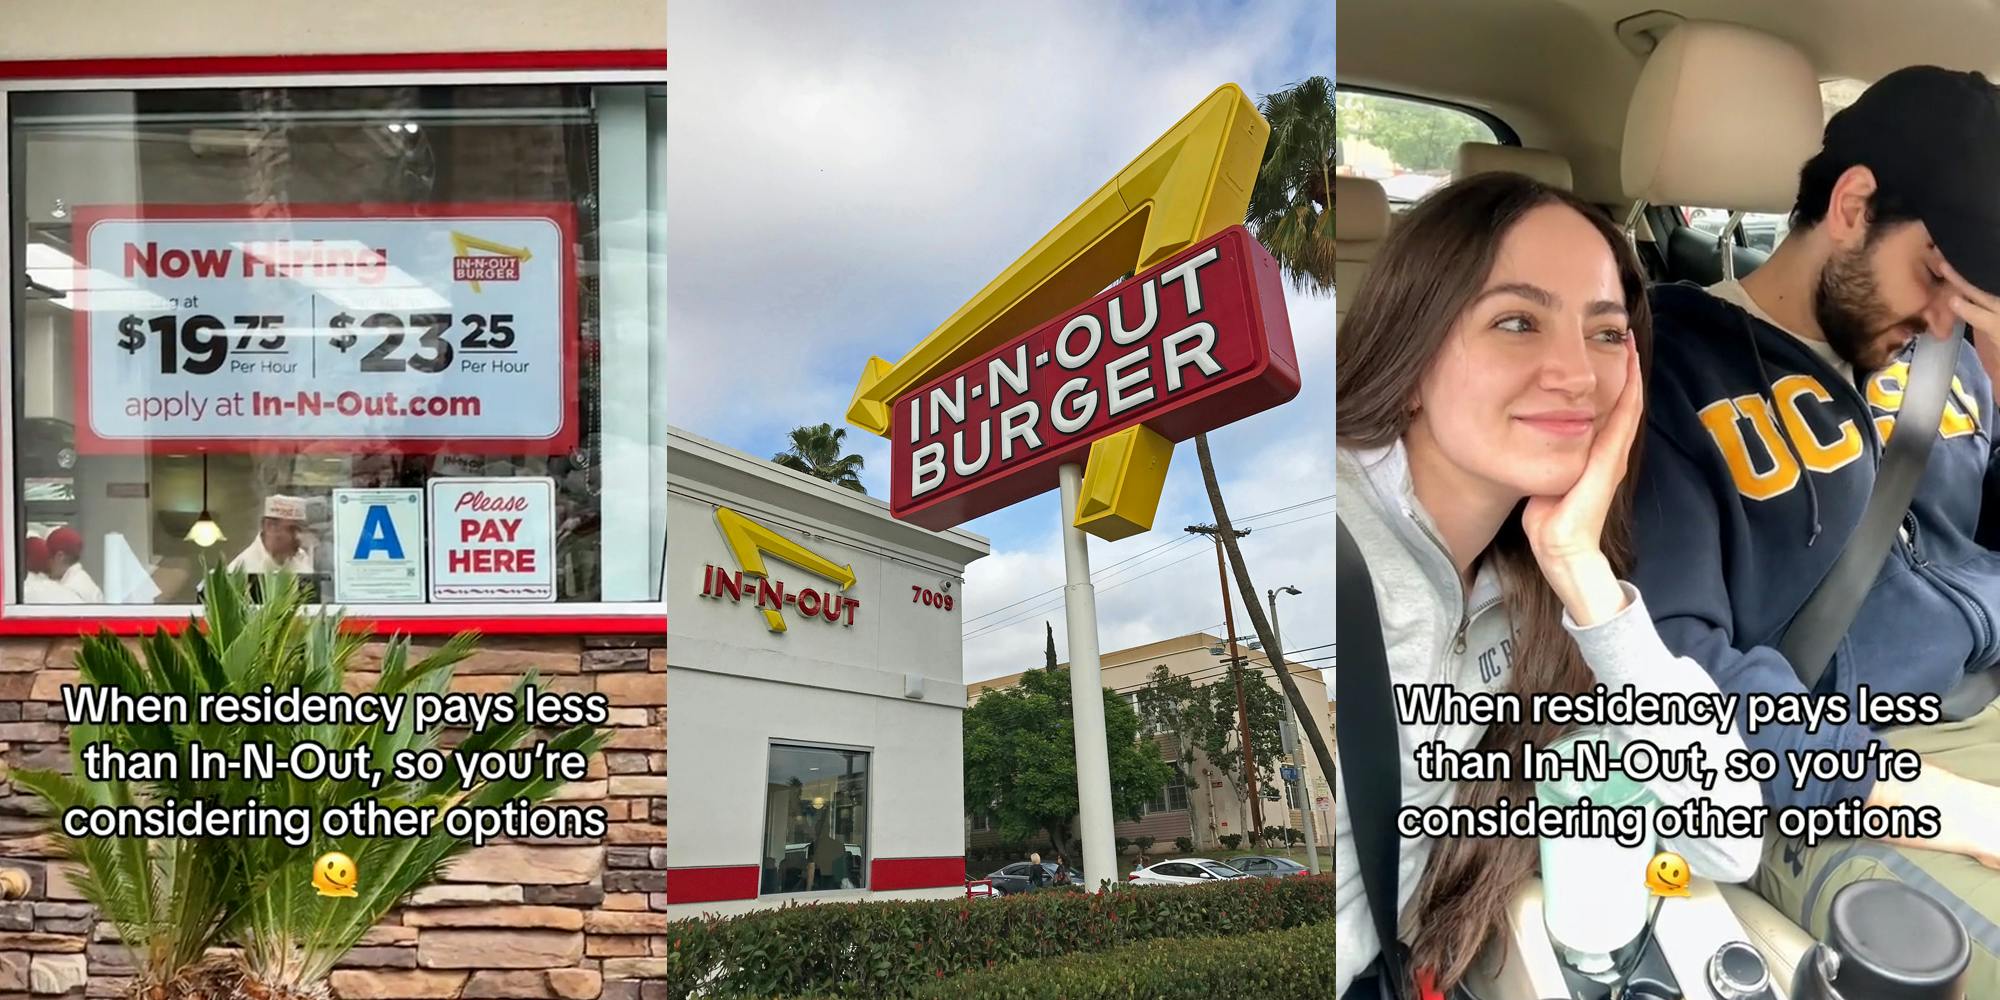 In-N-Out building with sign in window "Now Hiring $19.75 per hour $23.25 per hour" with caption "When residency pays less than In-N-Out, so you're considering other options" (l) In-N-Out sign with building (c) couple in car with caption "When residency pays less than In-N-Out, so you're considering other options" (r)